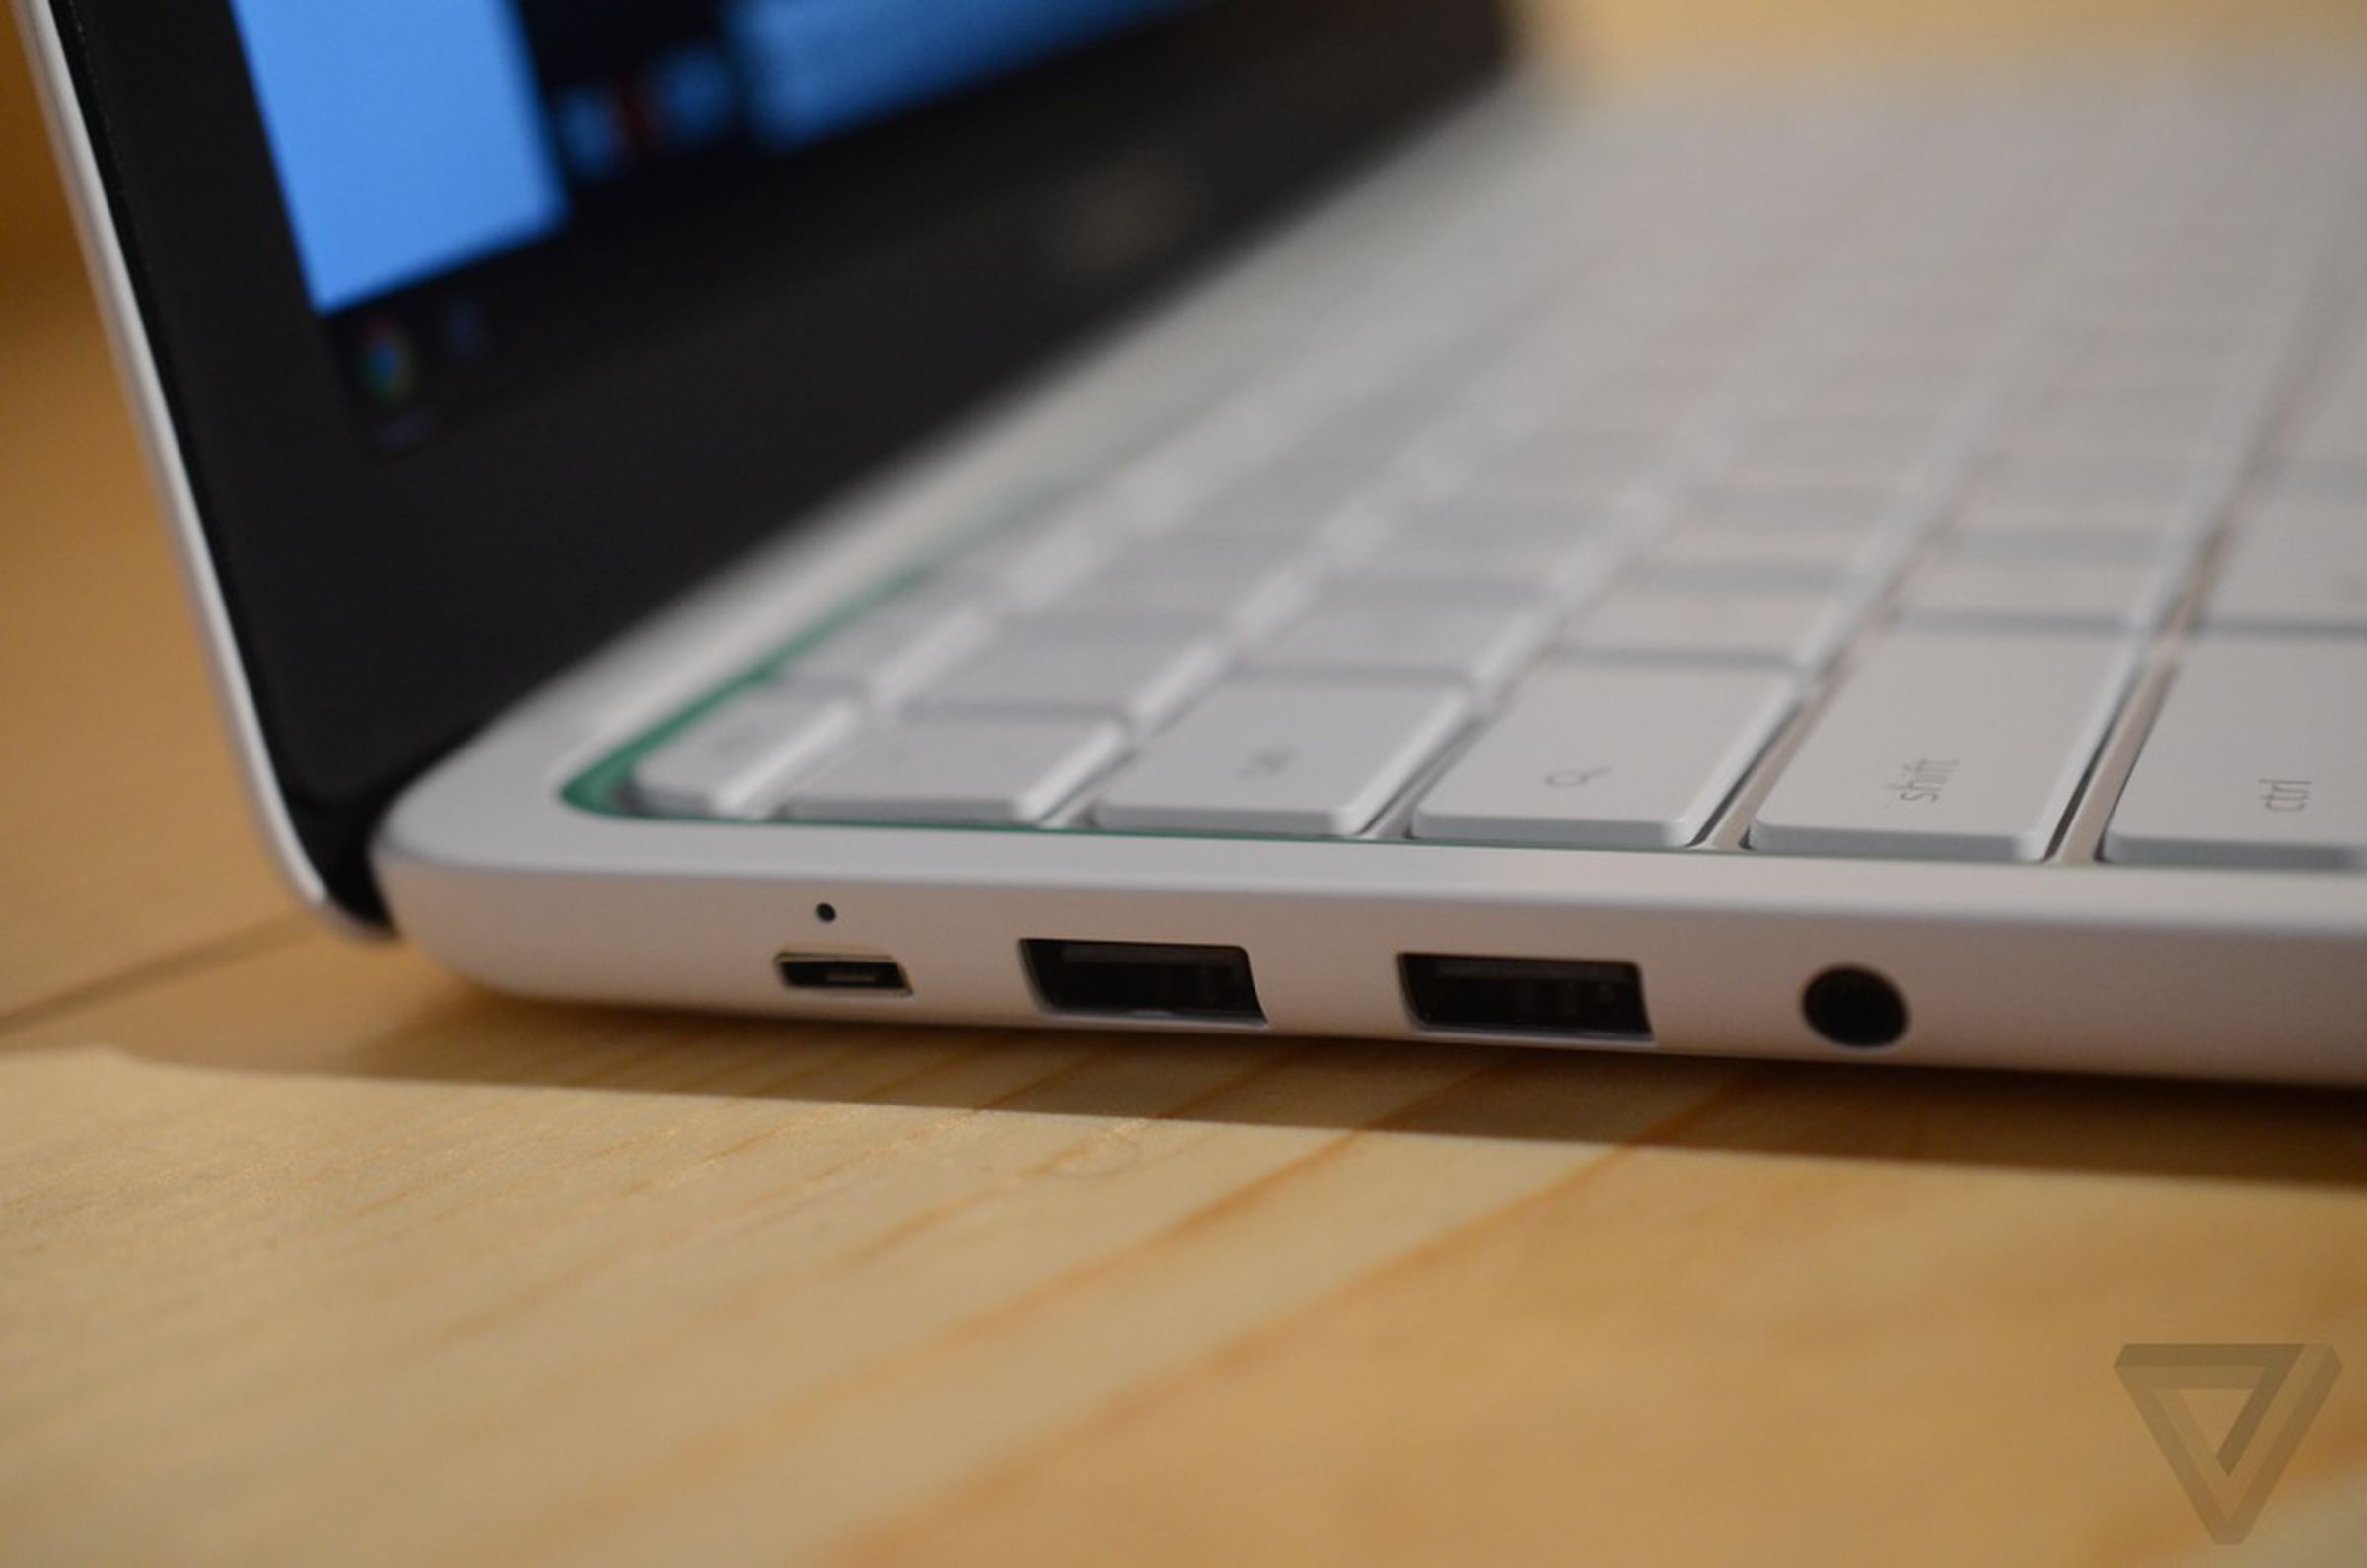 HP Chromebook 11 hands-on pictures